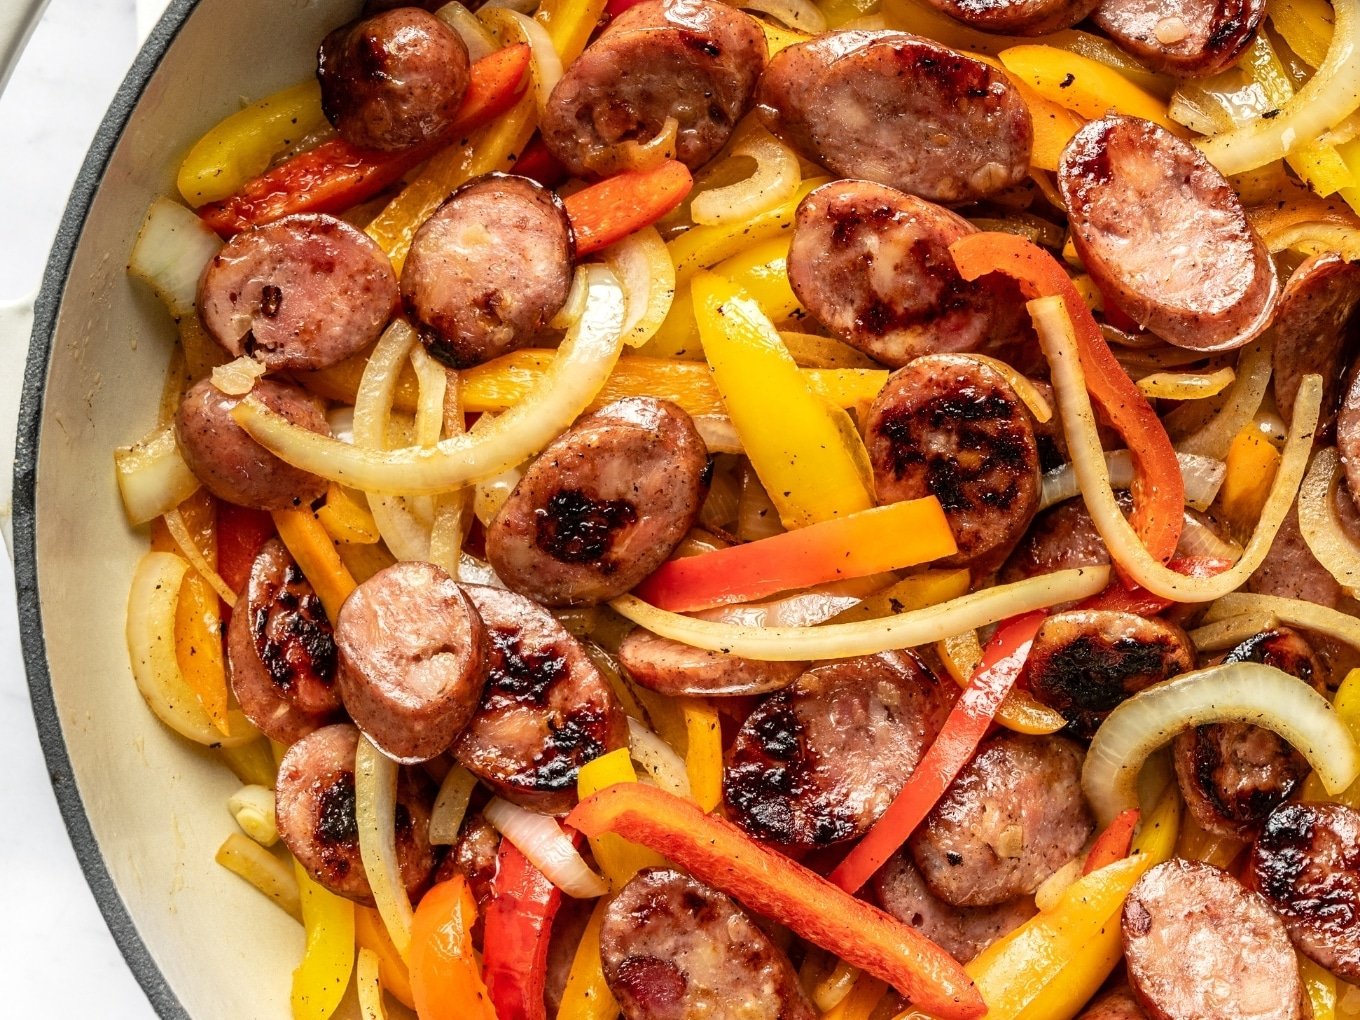 https://thewholecook.com/wp-content/uploads/2017/08/Sausage-Peppers-Skillet-by-the-Whole-Cook-horizontal-1.jpg